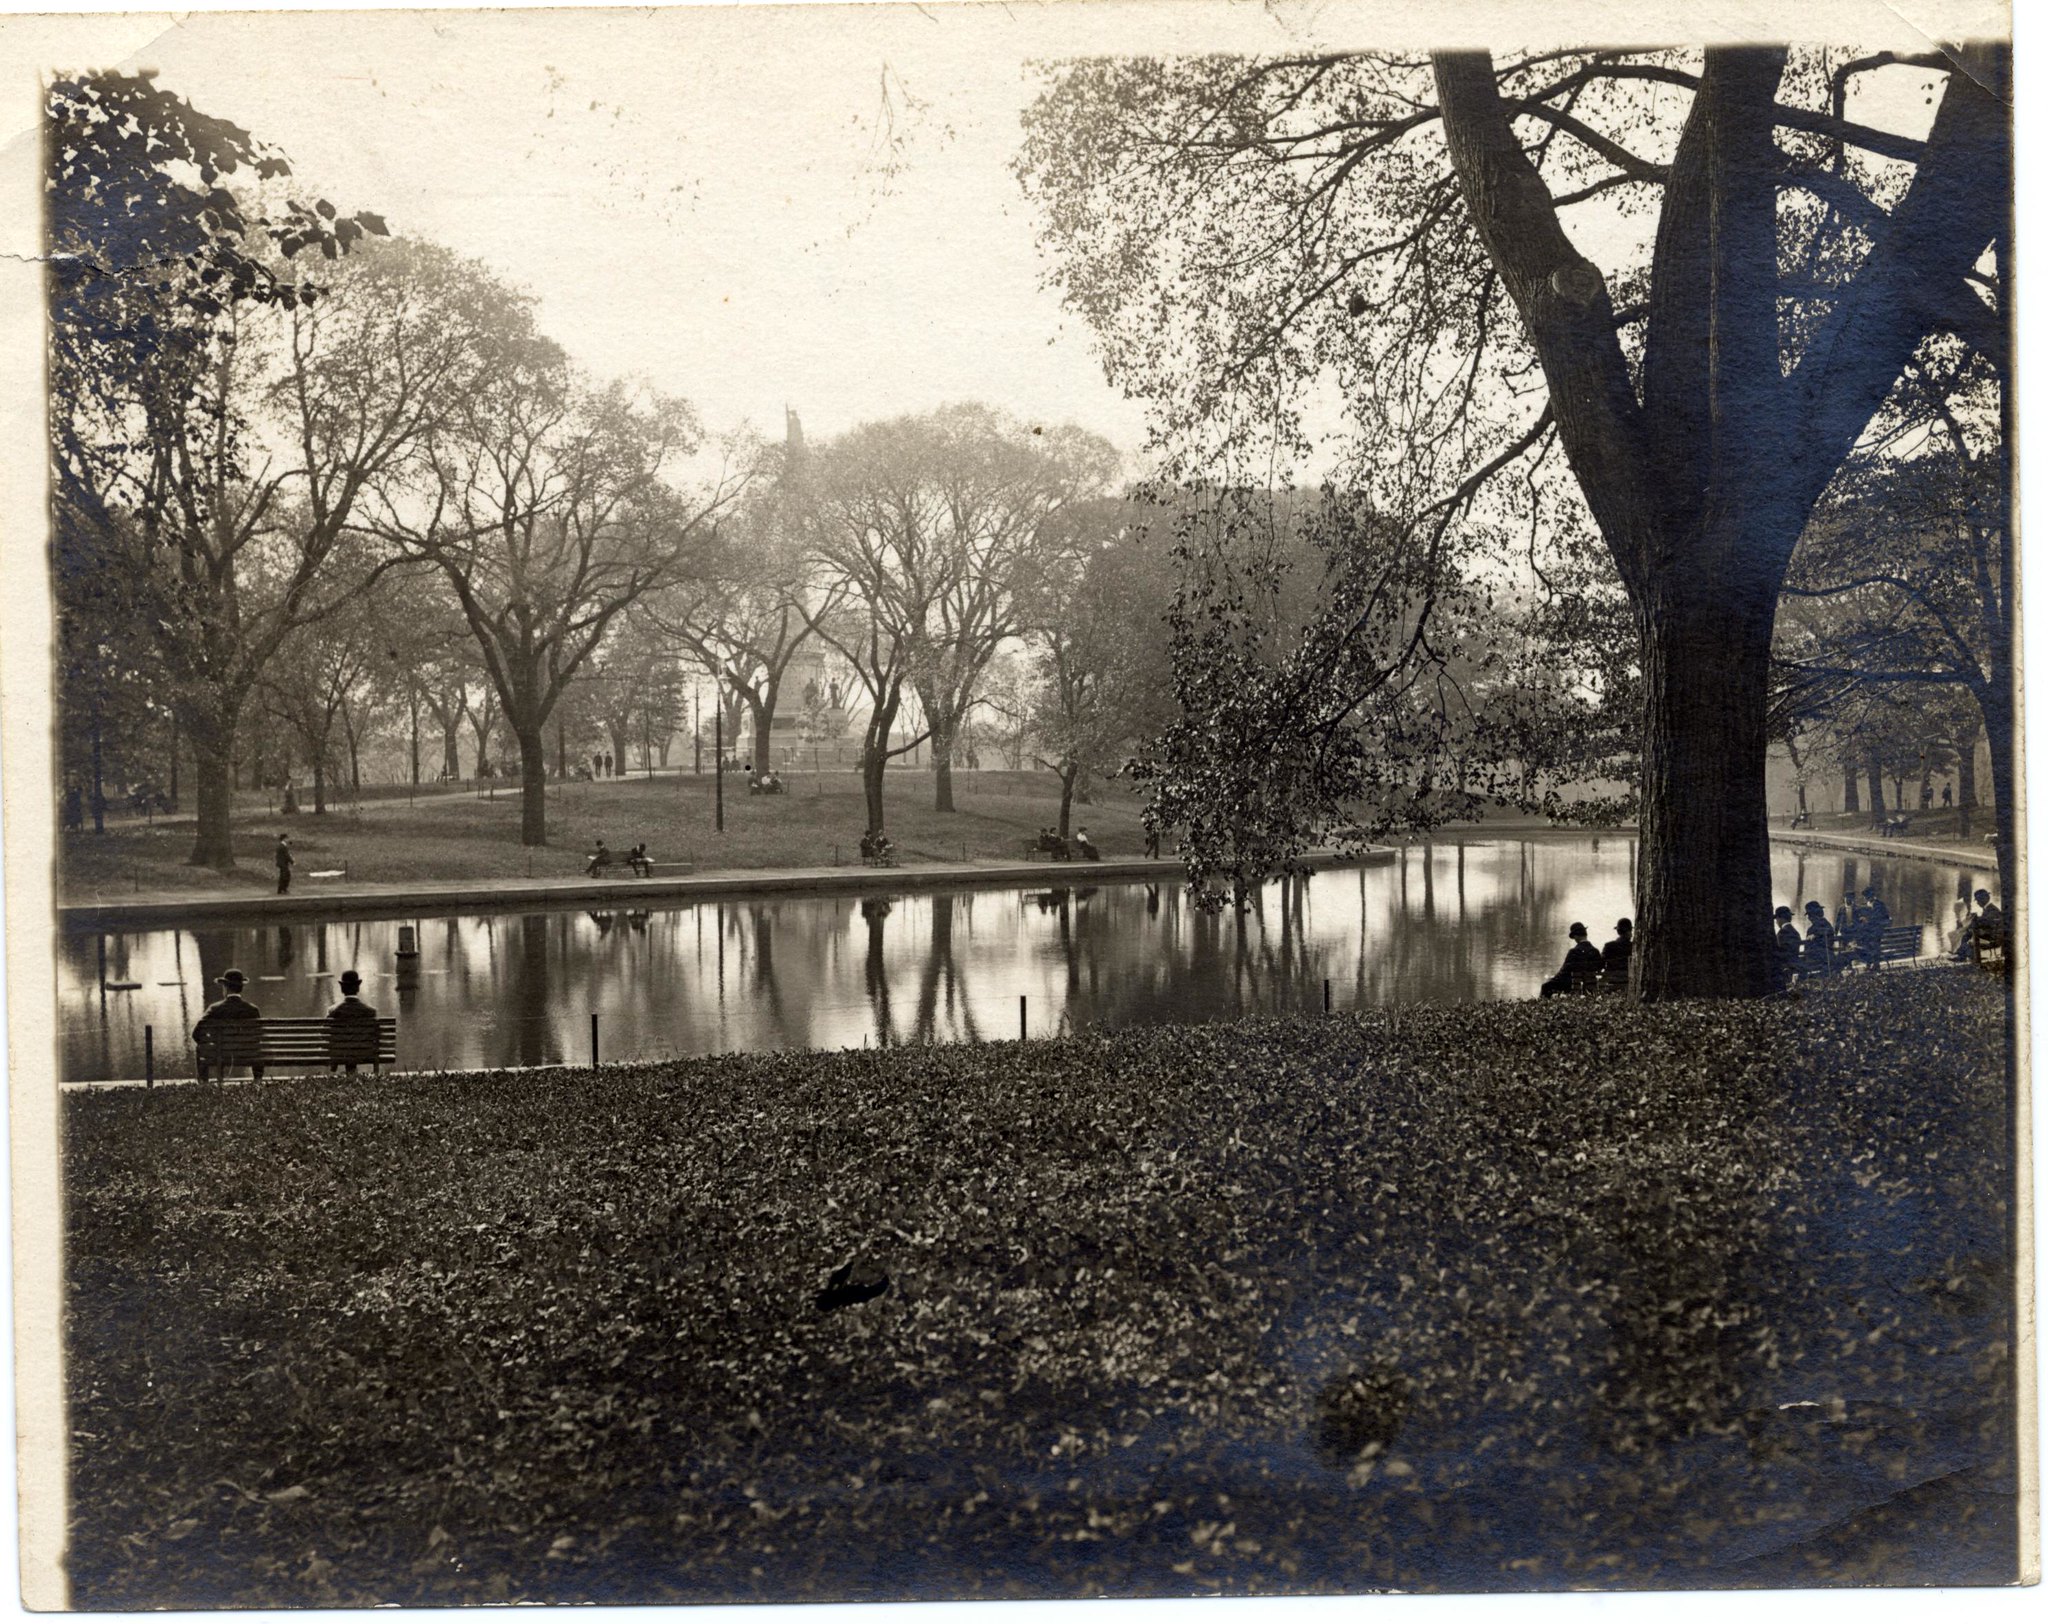 View of Boston Common c. 1900 Boston Landmarks Commission image Archives Scan